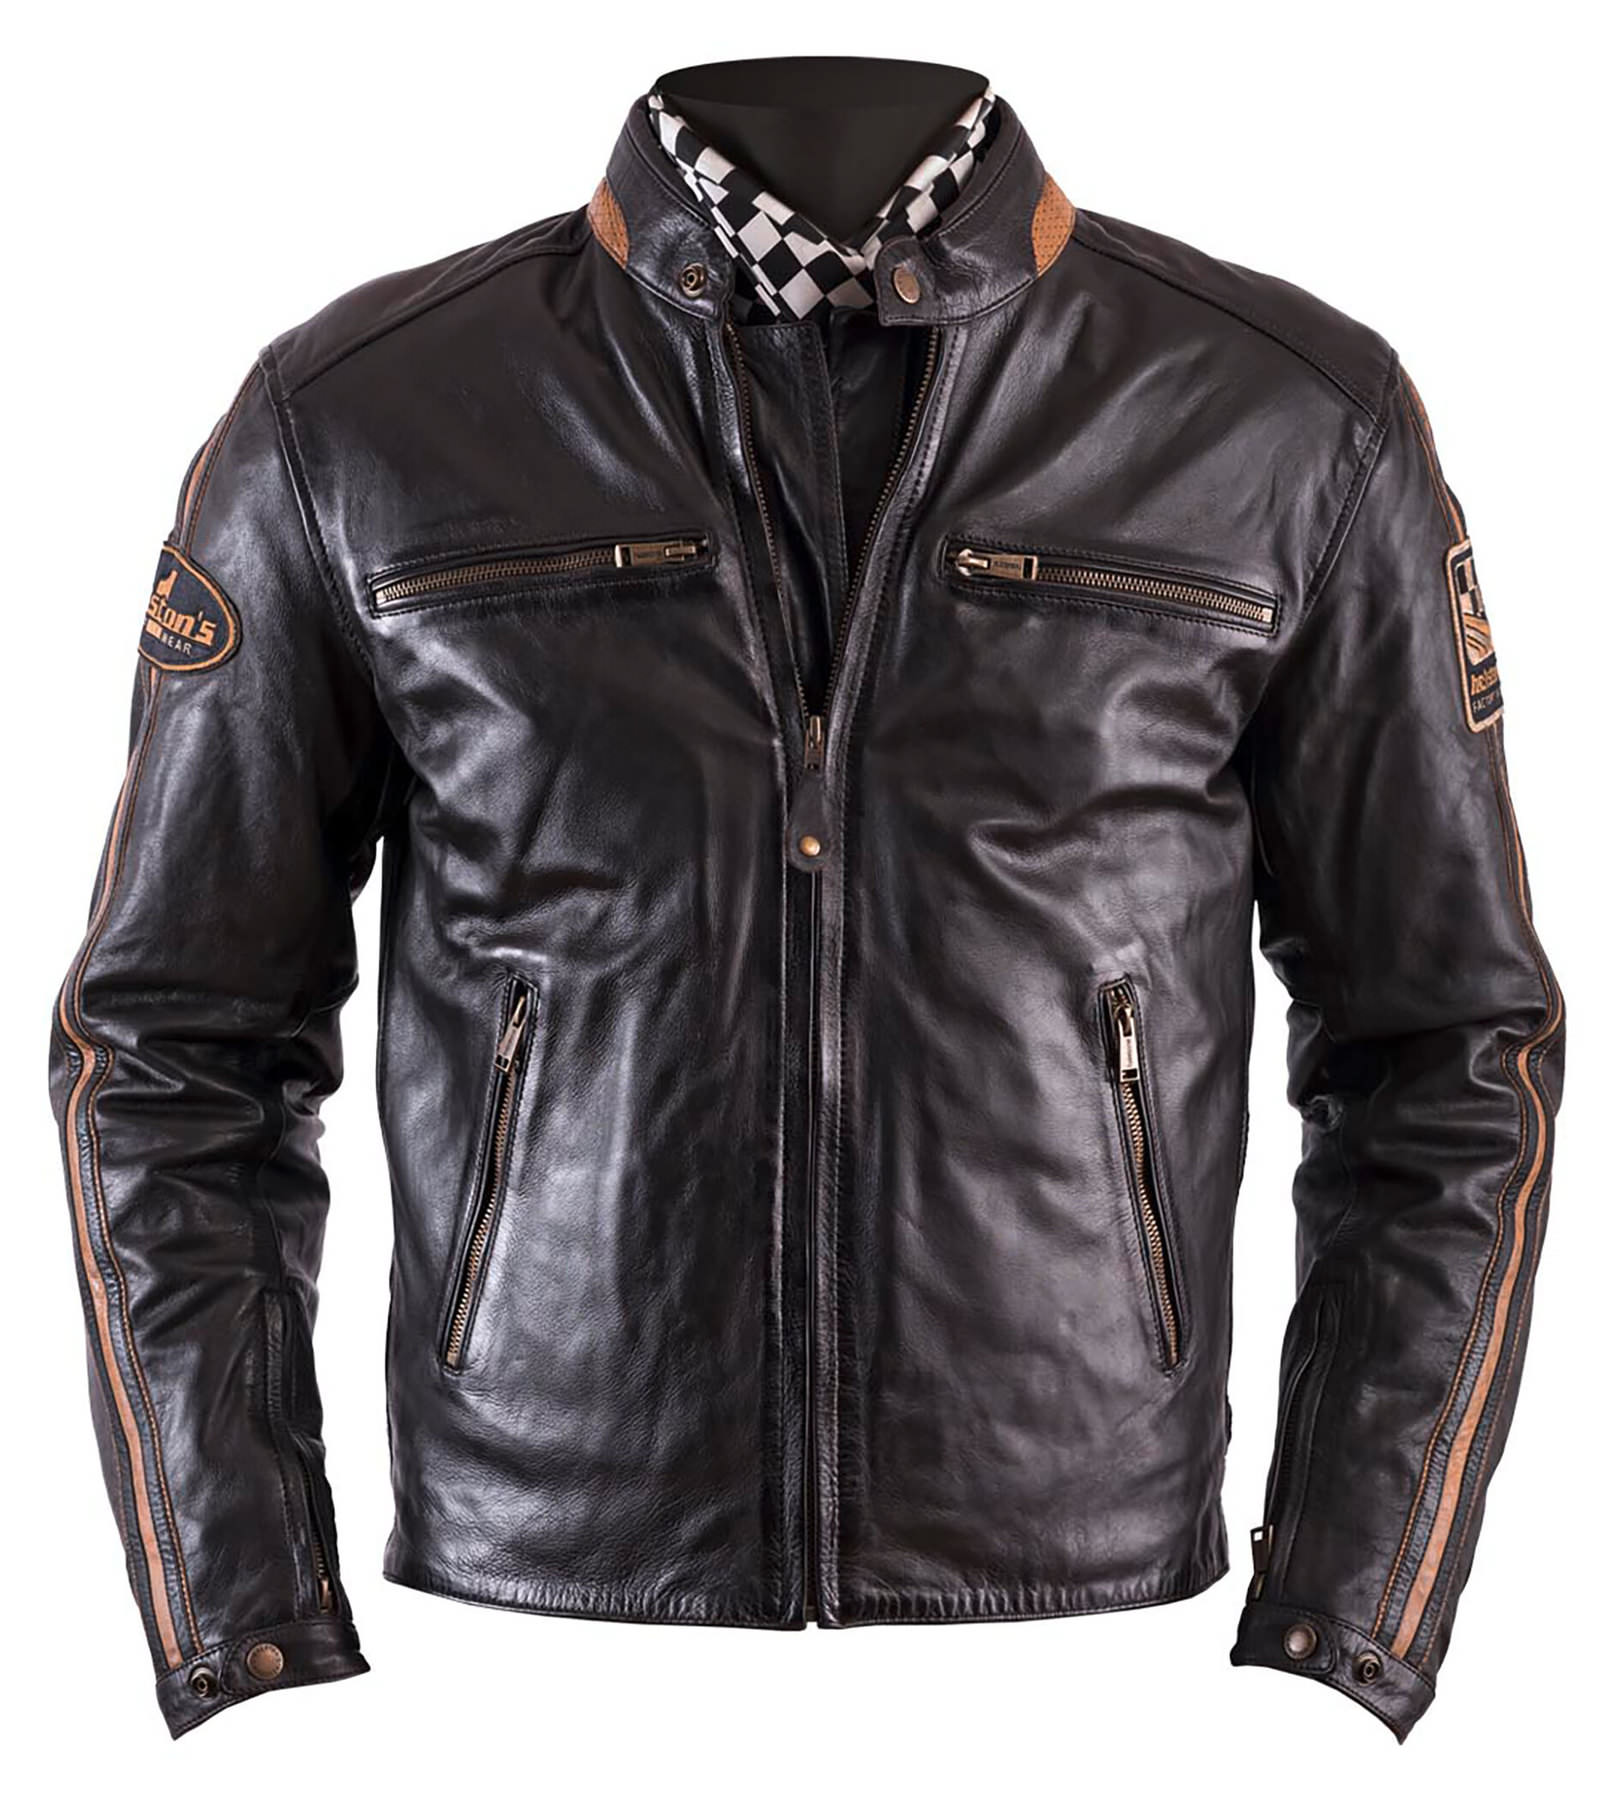 Buy Helstons Ace Rag leather jacket | Louis motorcycle clothing and ...